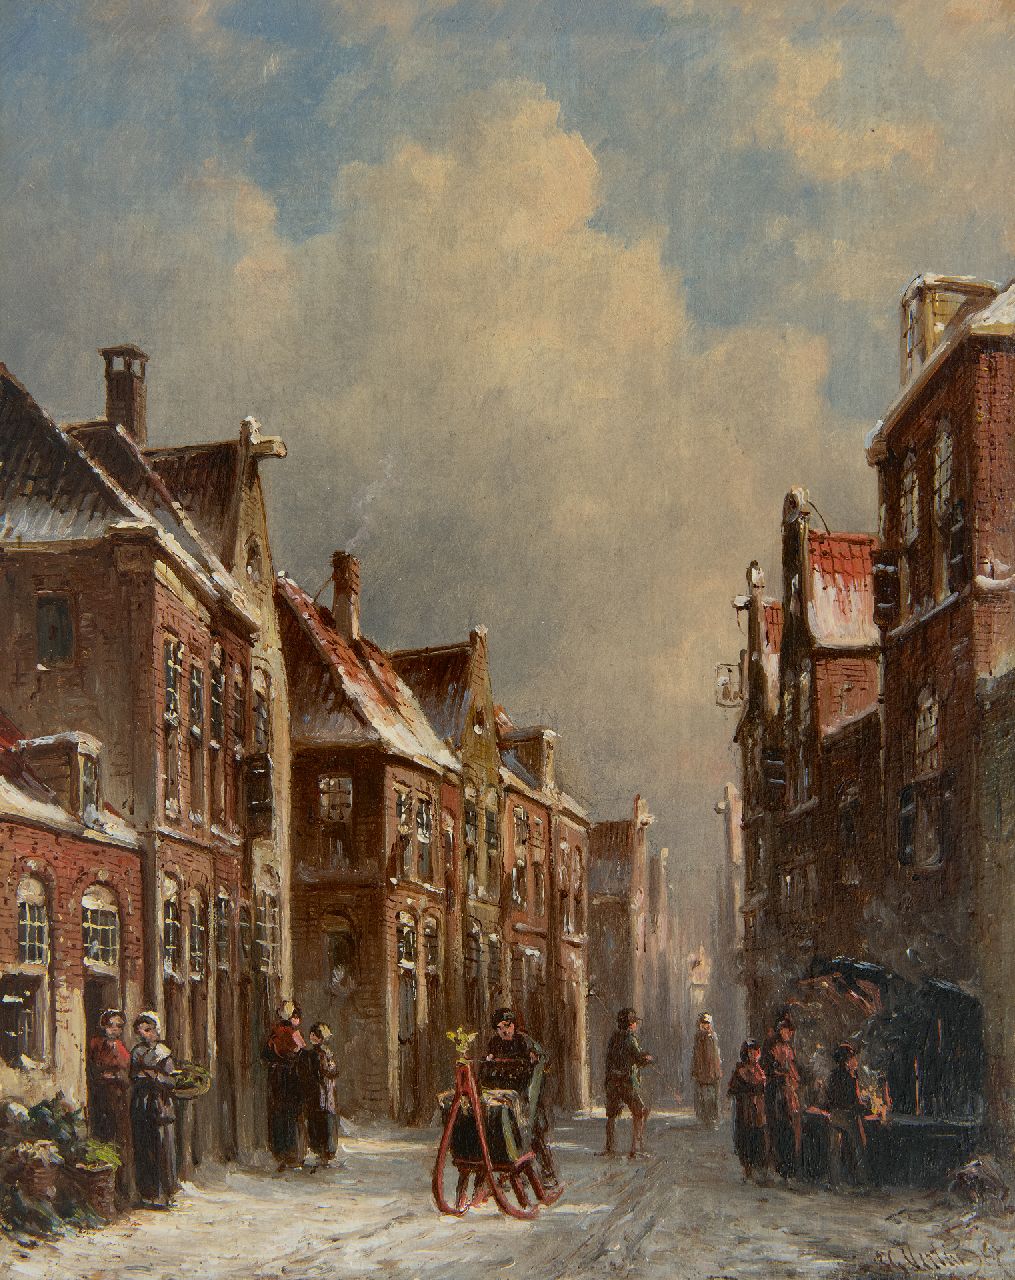 Vertin P.G.  | Petrus Gerardus Vertin, Village street in winter, oil on panel 24.1 x 19.0 cm, signed l.r. and dated '67